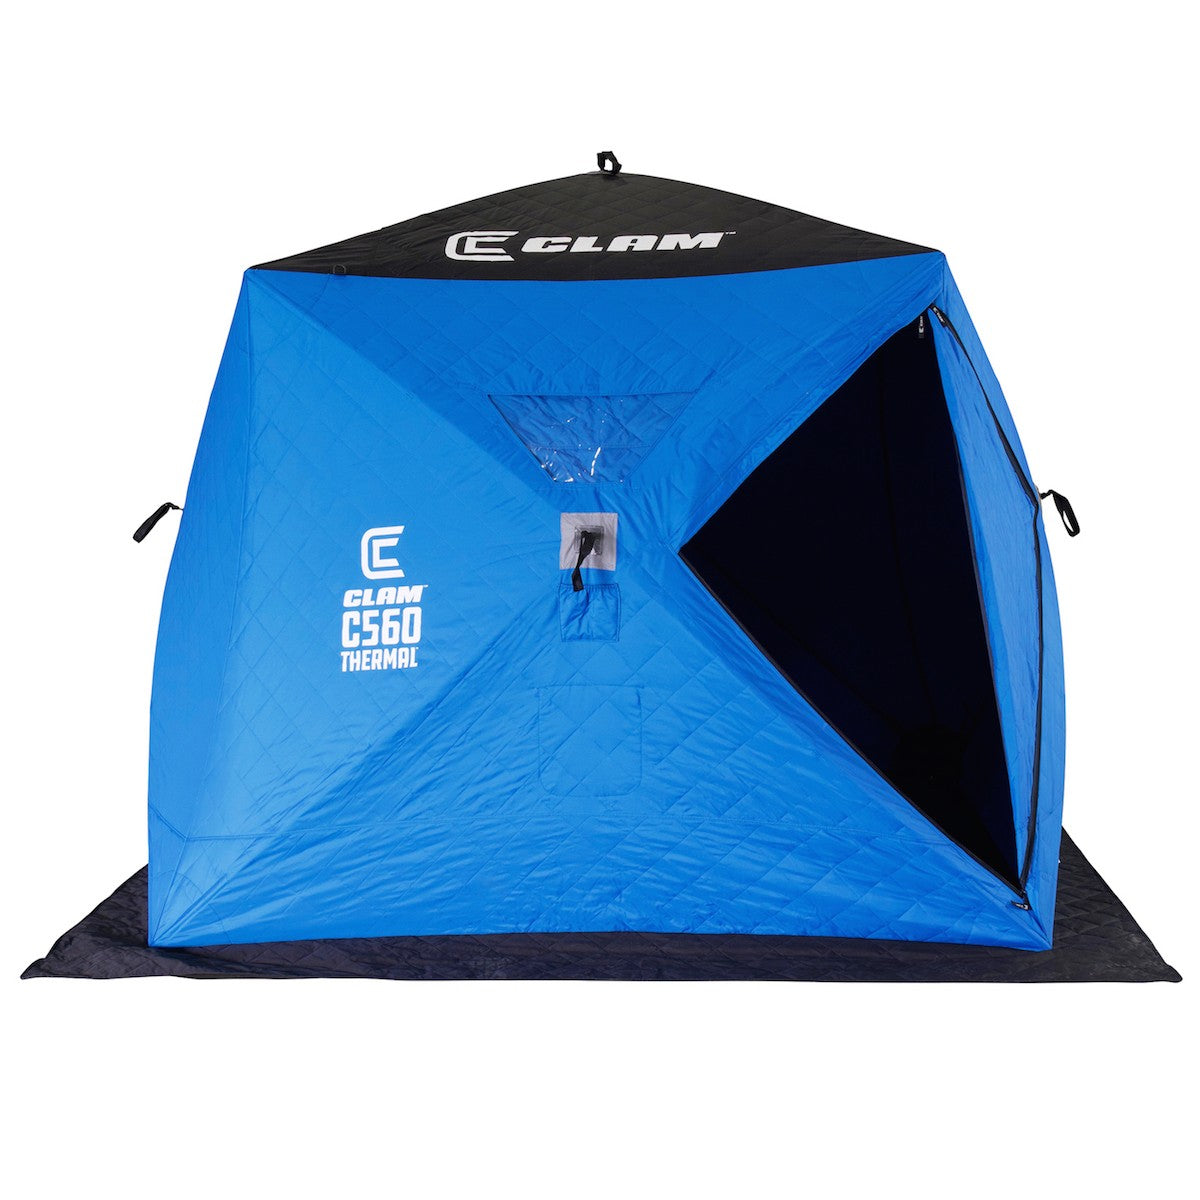 CLAM C560 Hub Thermal 8x8 Shelter